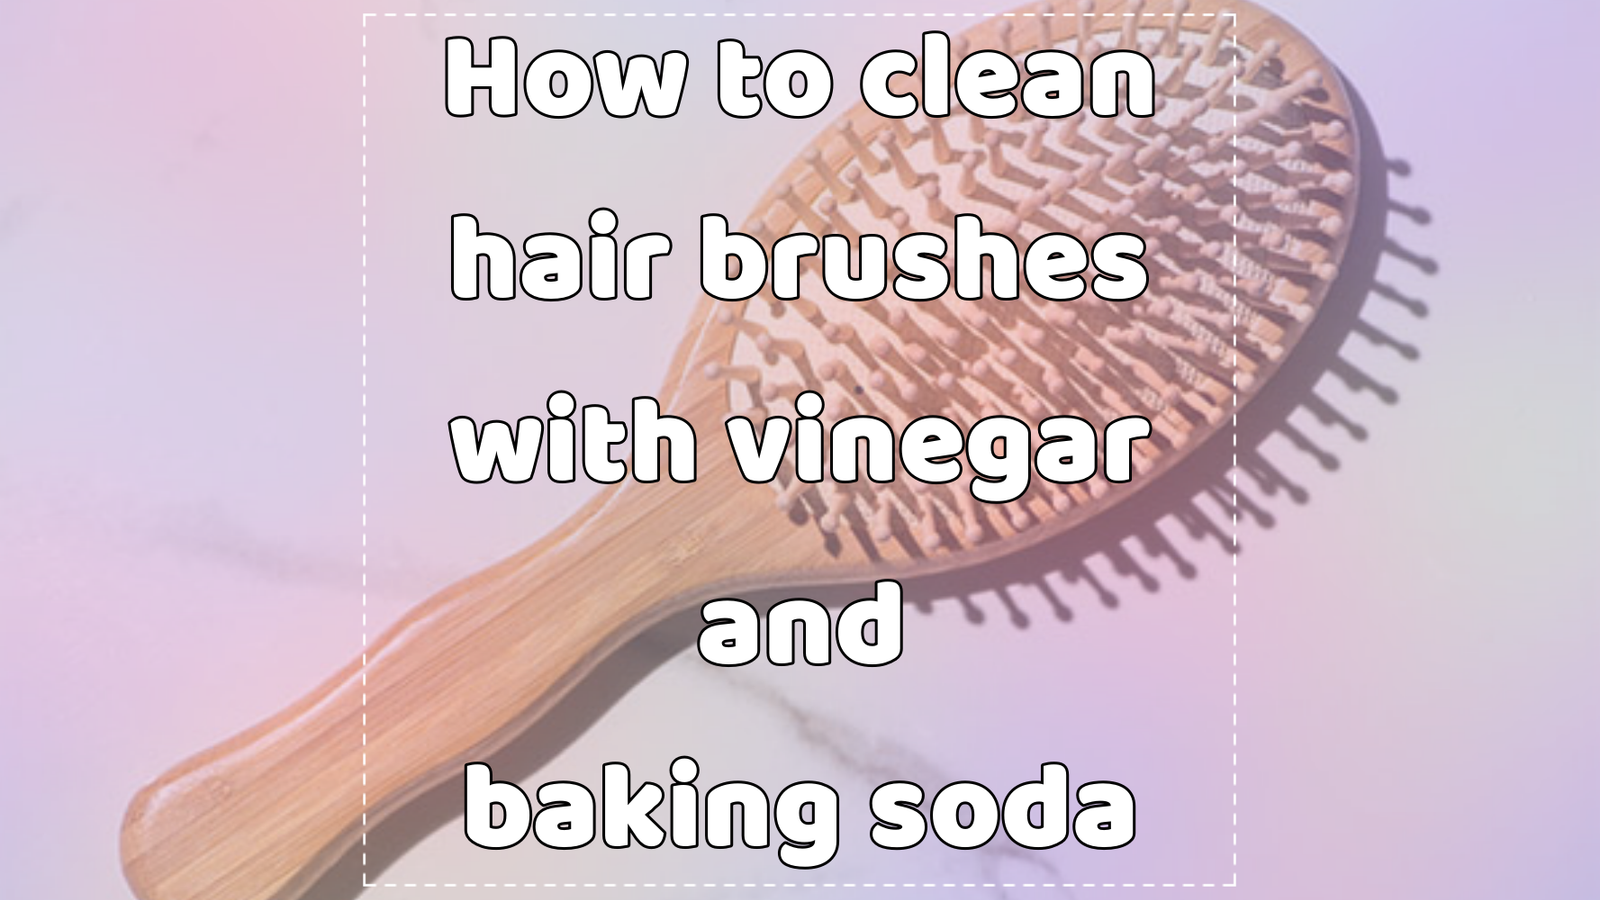 How to clean hair brushes with vinegar and baking soda